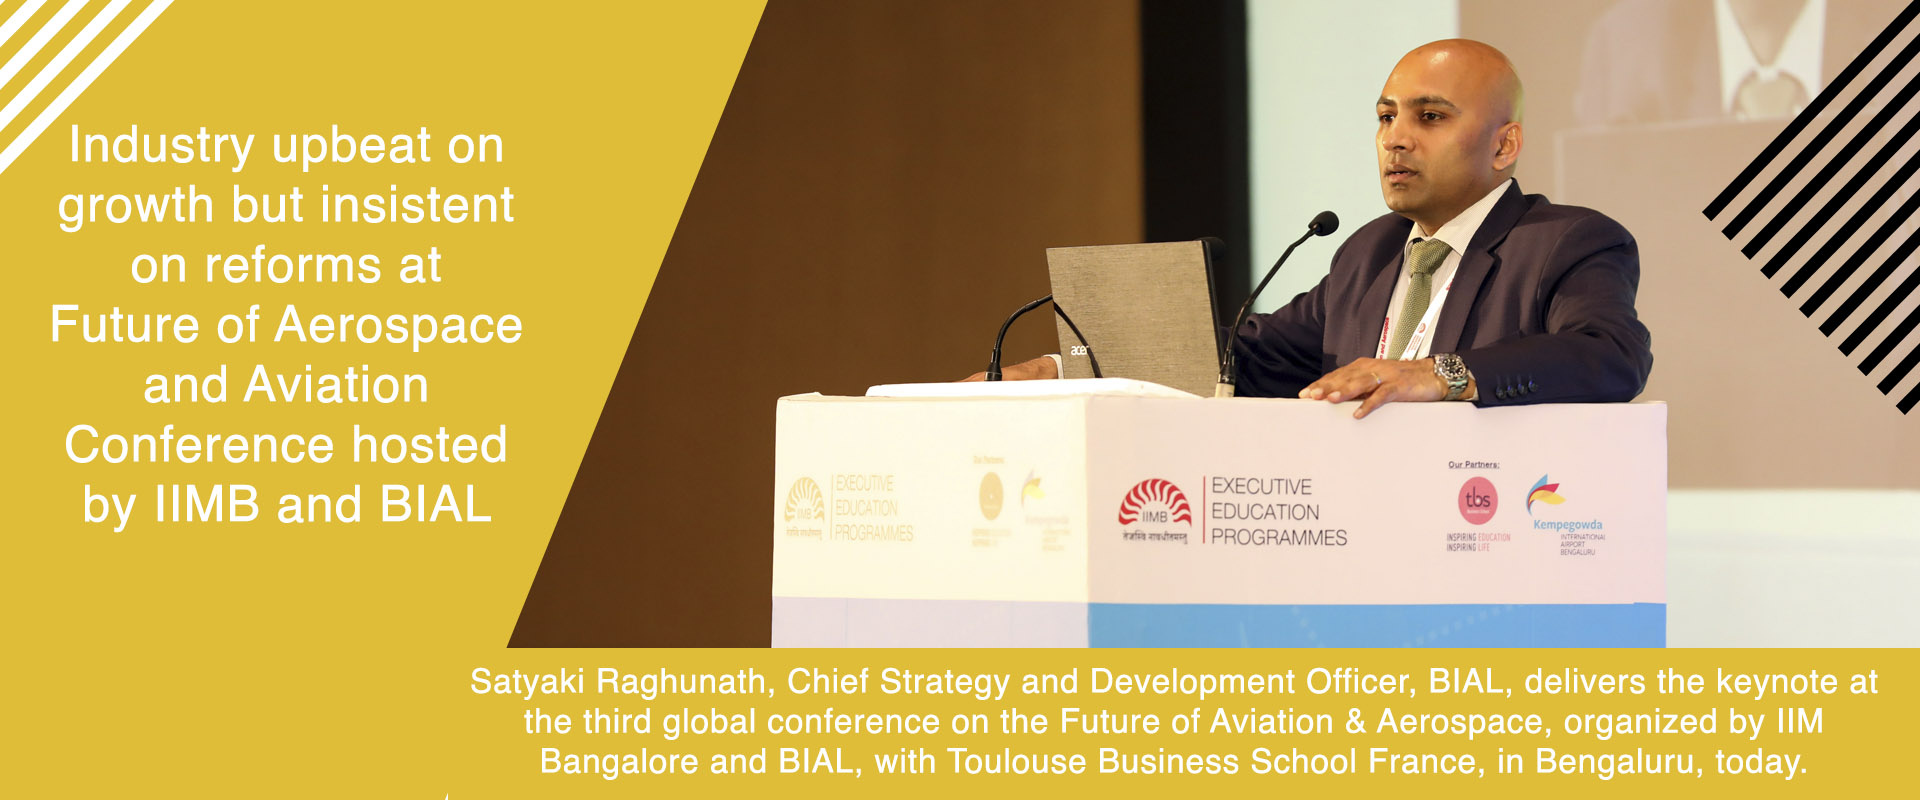 Industry upbeat on growth but insistent on reforms at Future of Aerospace and Aviation Conference hosted by IIMB and BIAL